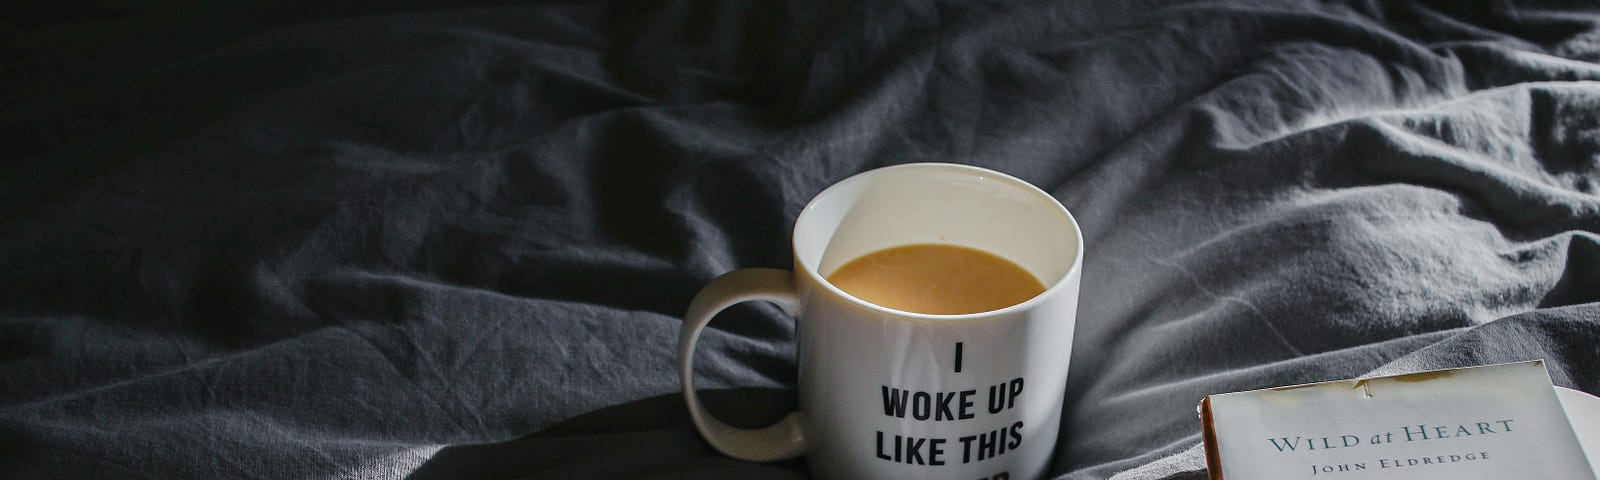 photo of a coffee mug that reads “I woke up like this #tired.” The mug is sitting on gray sheets beside an open book.